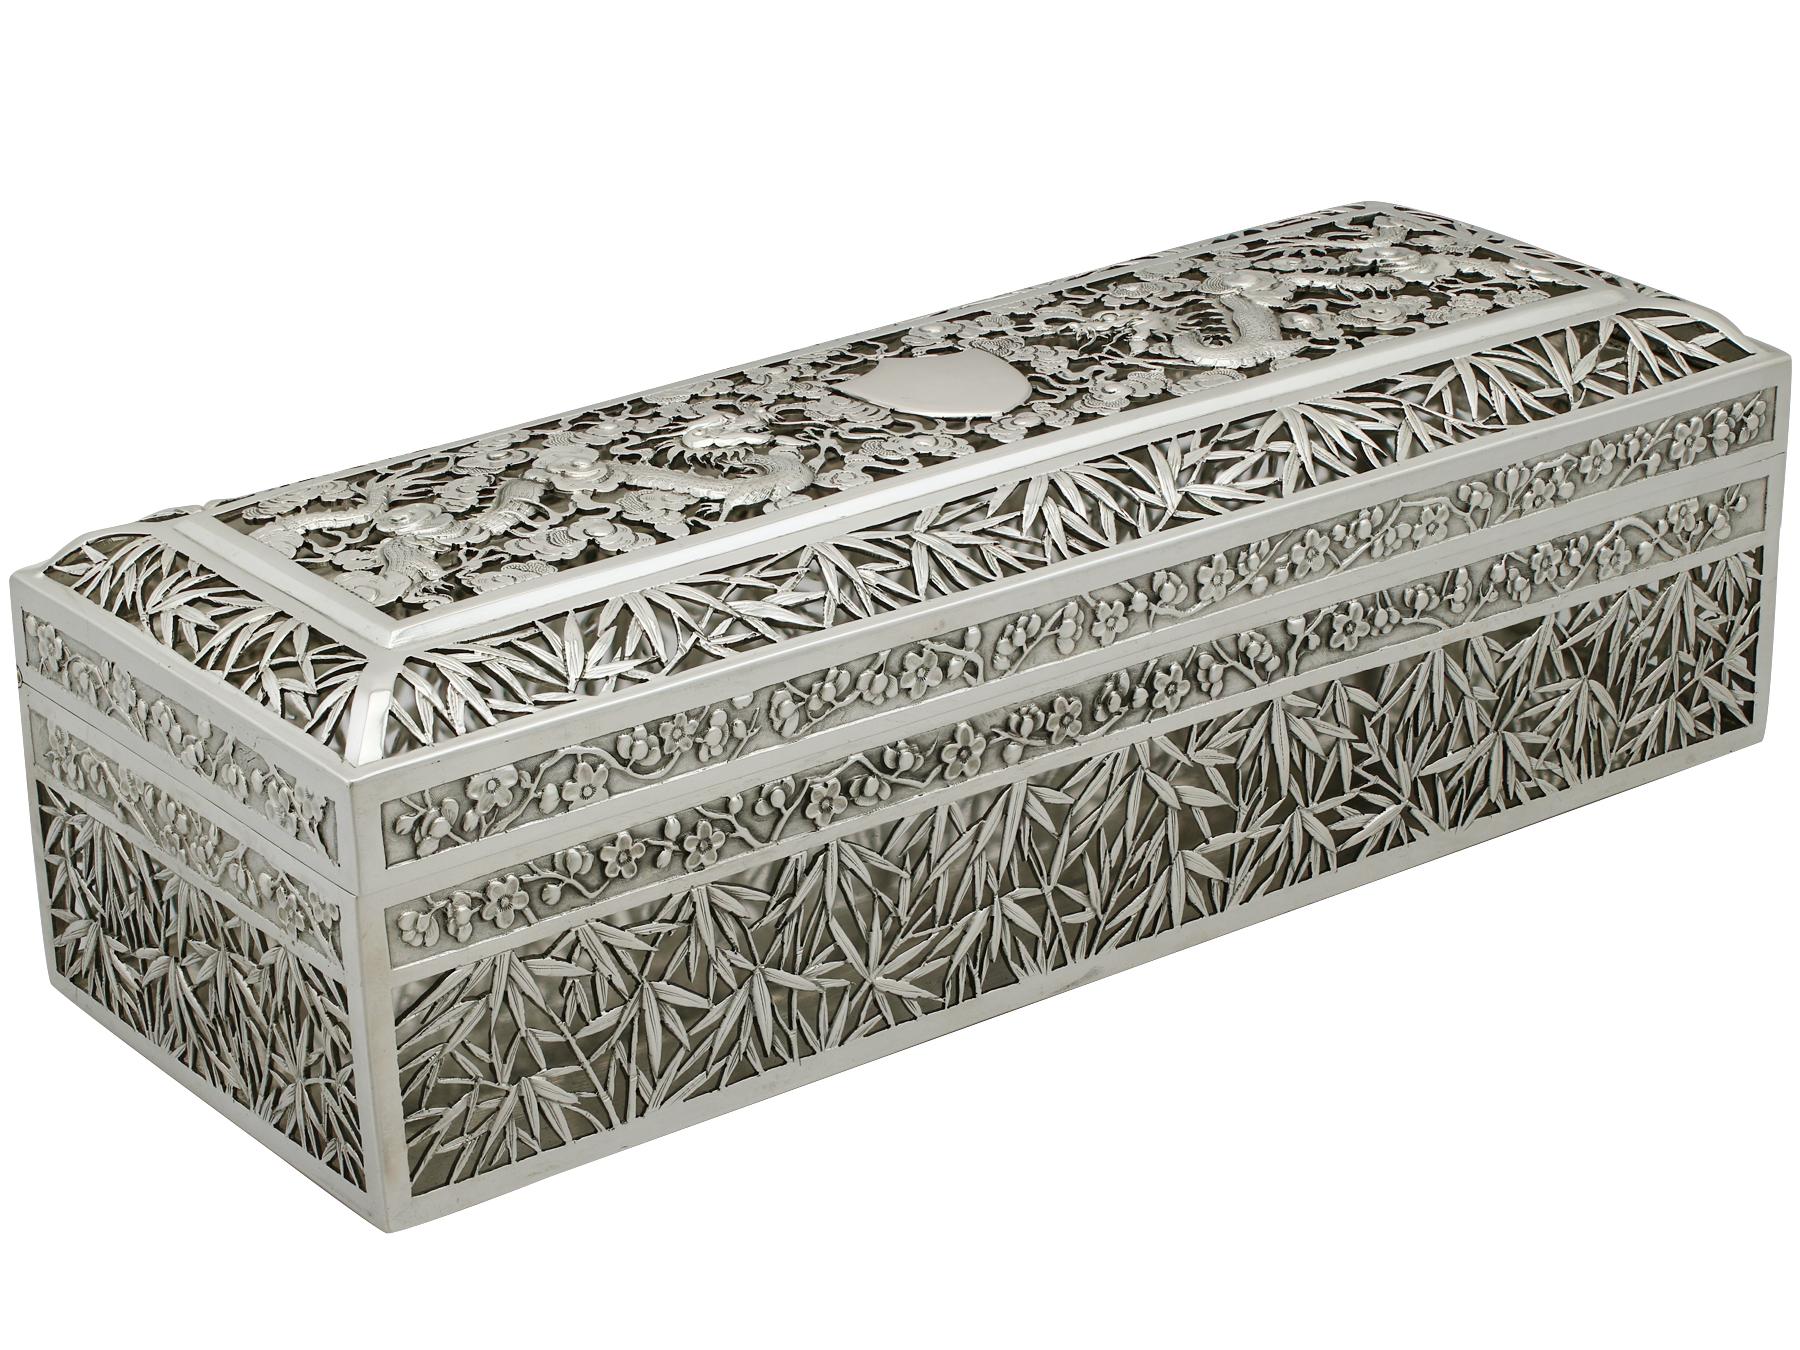 A magnificent, fine and impressive antique Chinese export silver box; an addition to our oriental silver boxes collection.

This magnificent antique Chinese export silver (CES) box has a rectangular form.

The lower portion of this antique